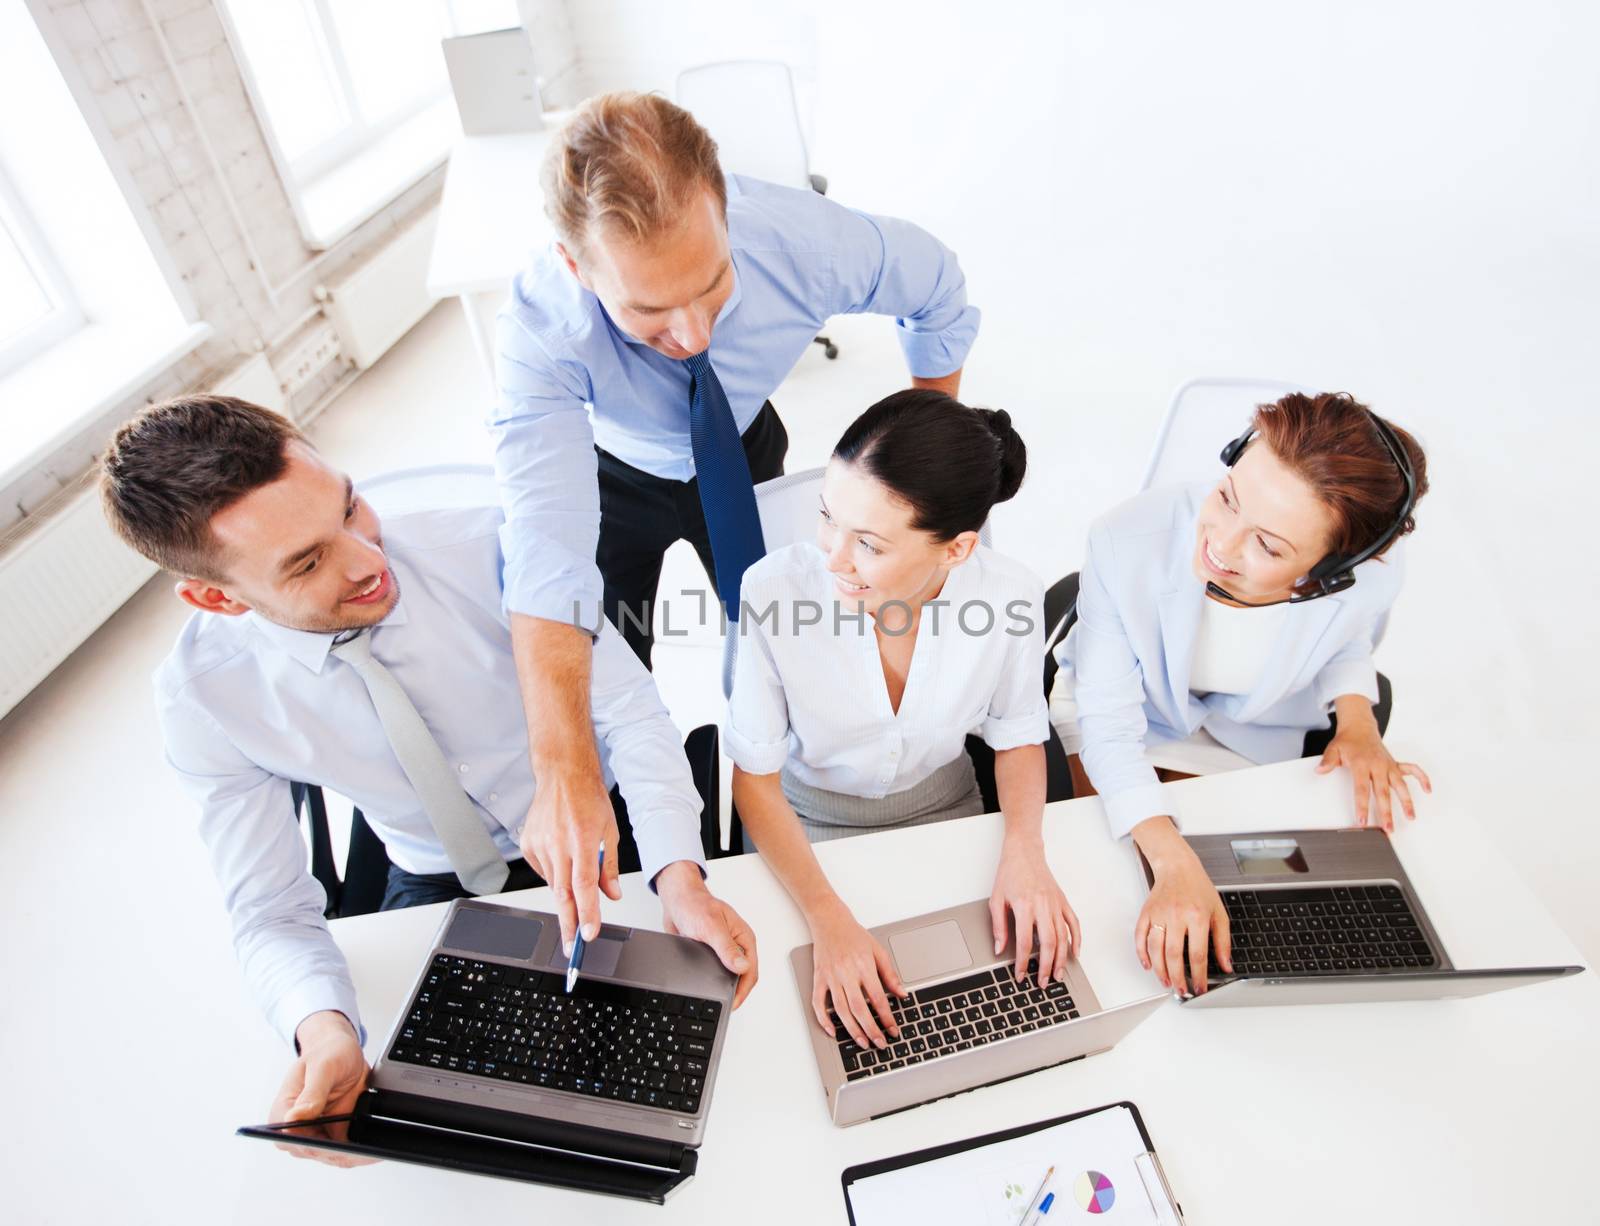 business concept - group of people working in call center or office